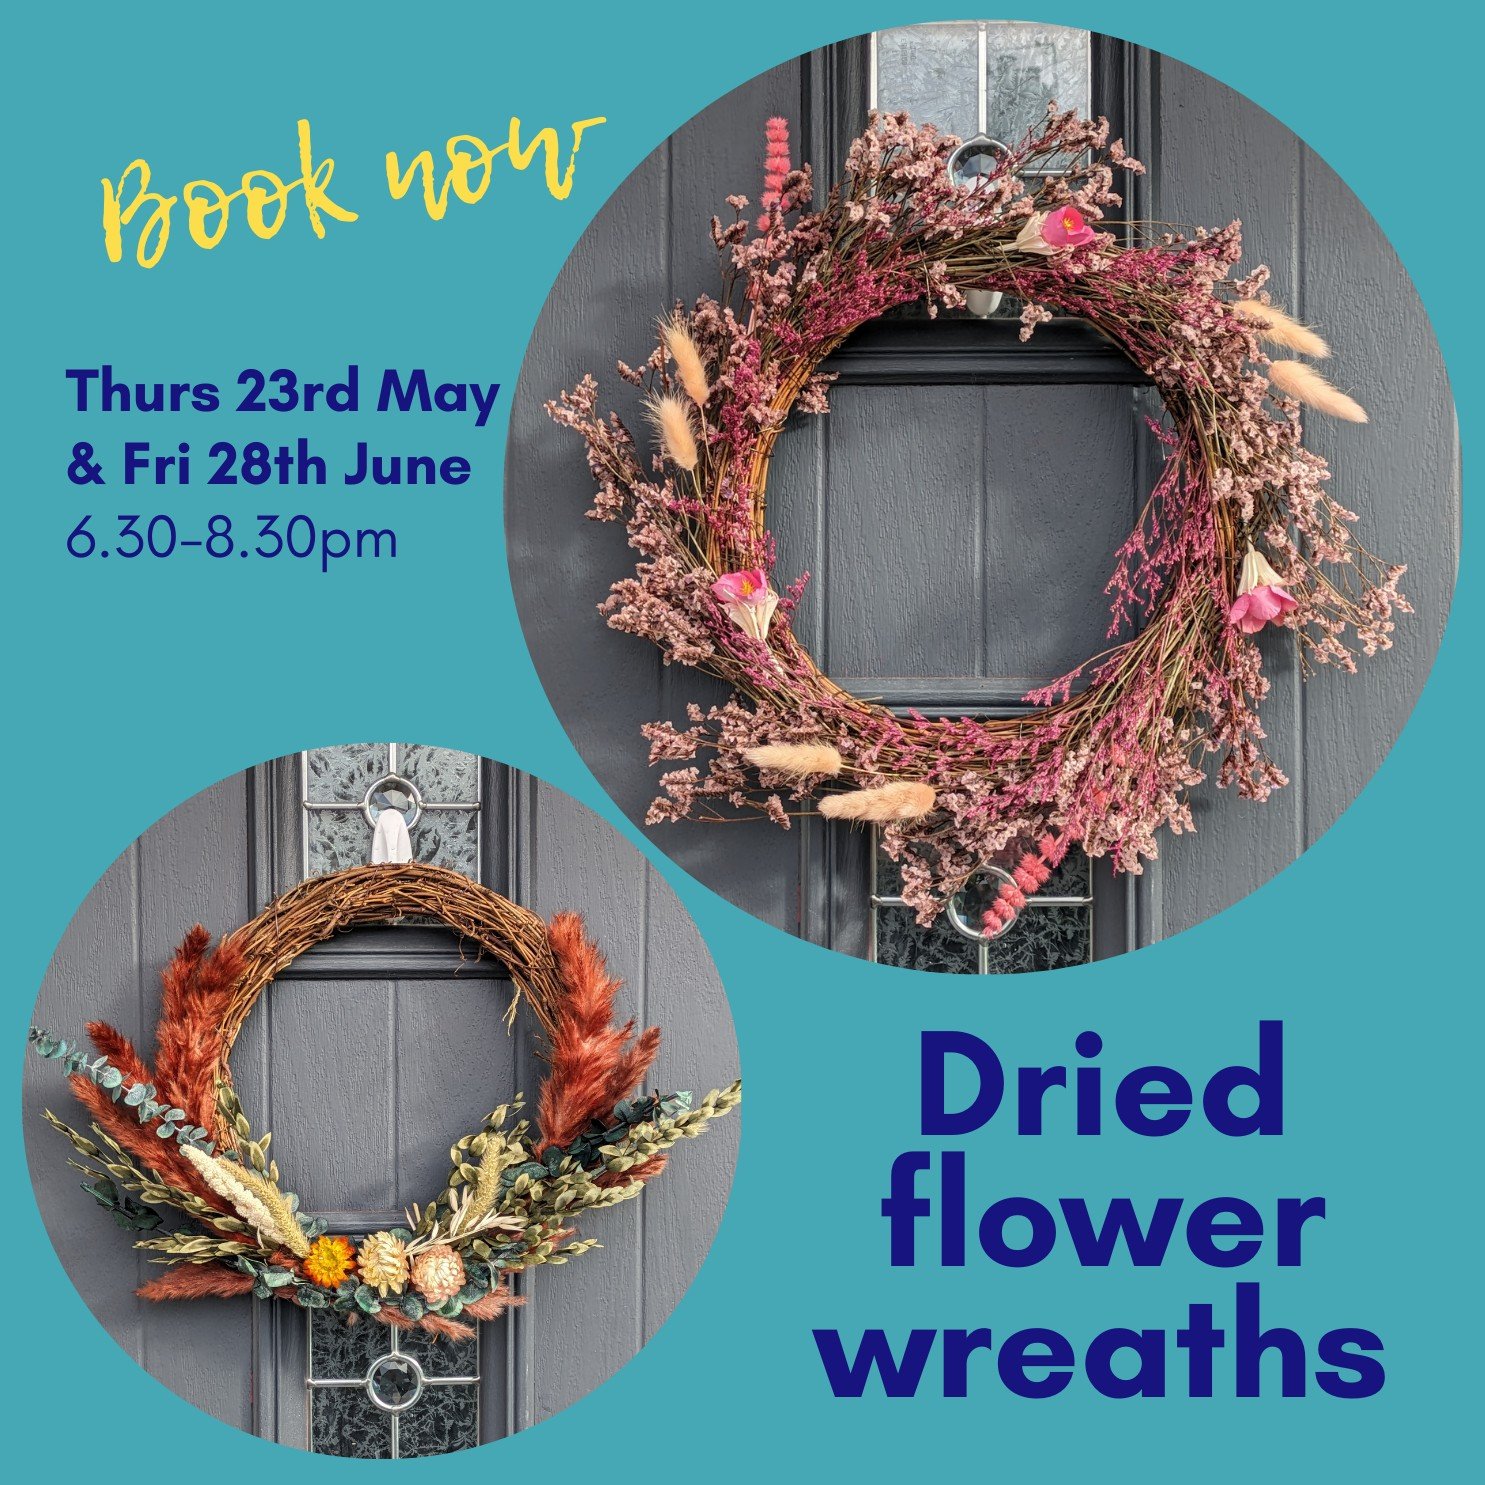 **NEW WORKSHOP ALERT**

We've got a lush new workshop for you and we're well excited to tell you all about it! If you love wreath making at Christmas, this one is for you. Why should wreaths just be festive eh? So join Em for 2 hours of dried flower 